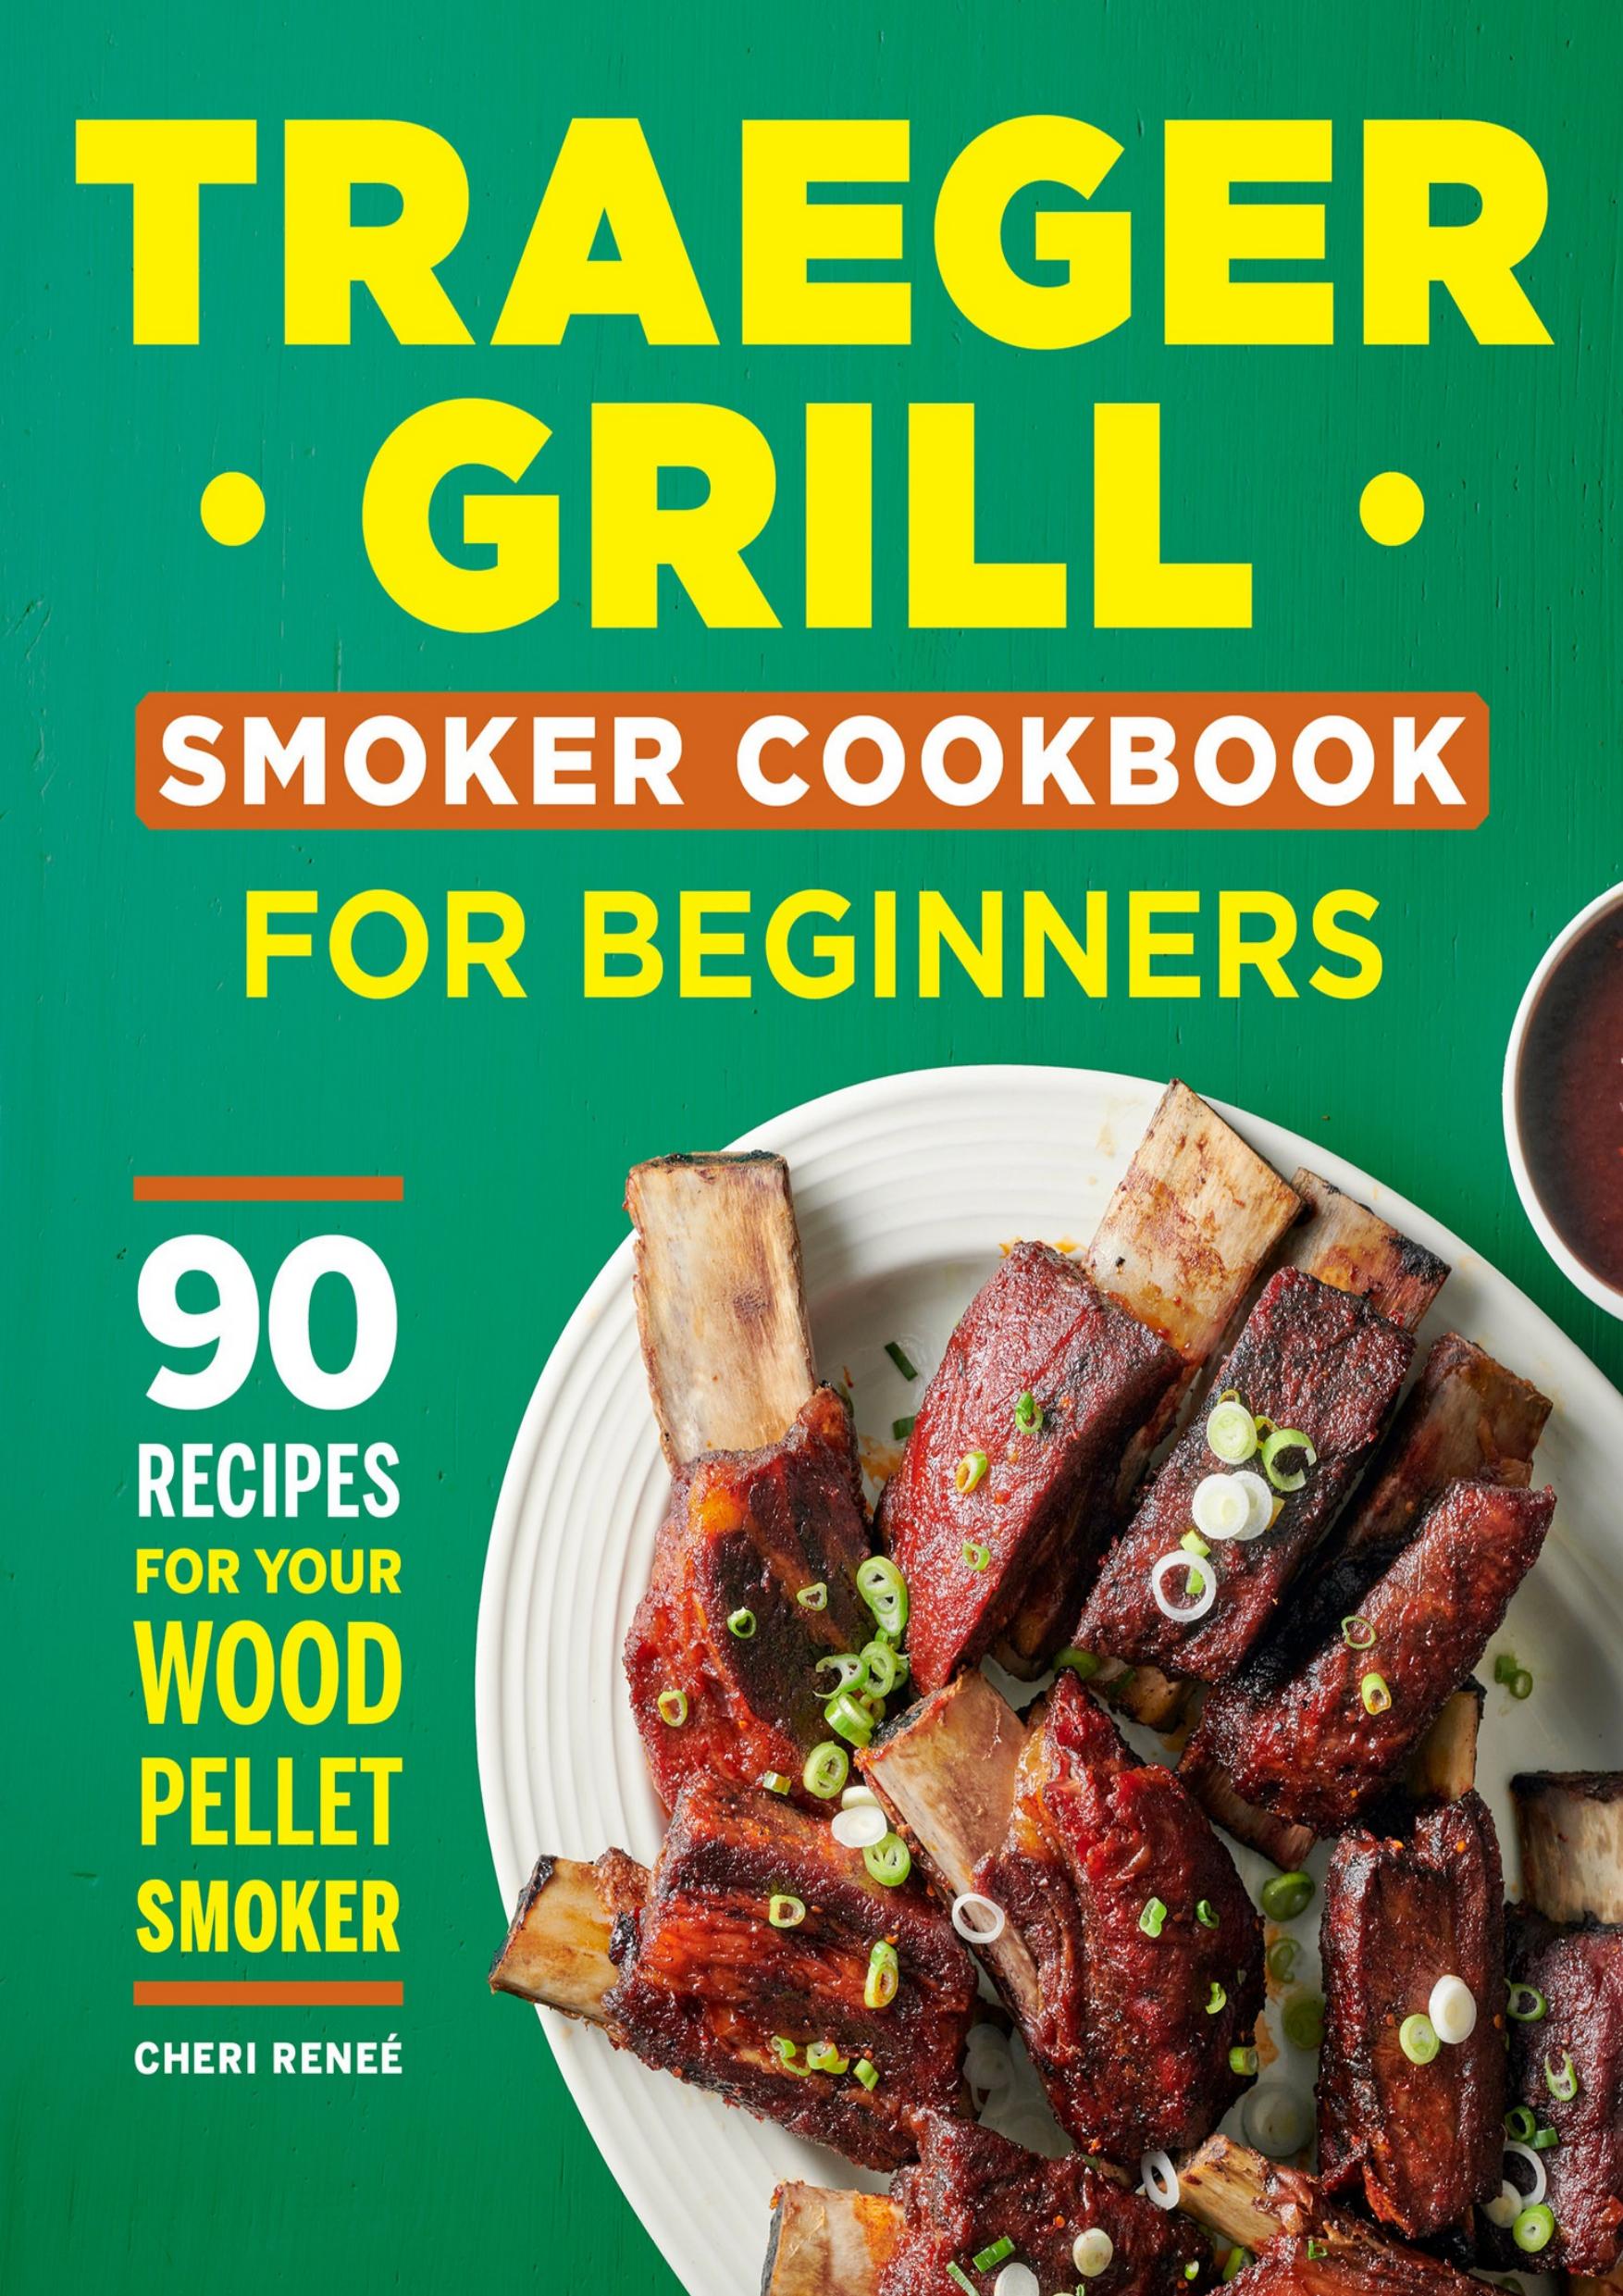 Traeger Grill Smoker Cookbook for Beginners: 90 Recipes for Your Wood Pellet Smoker by Reneé Cheri